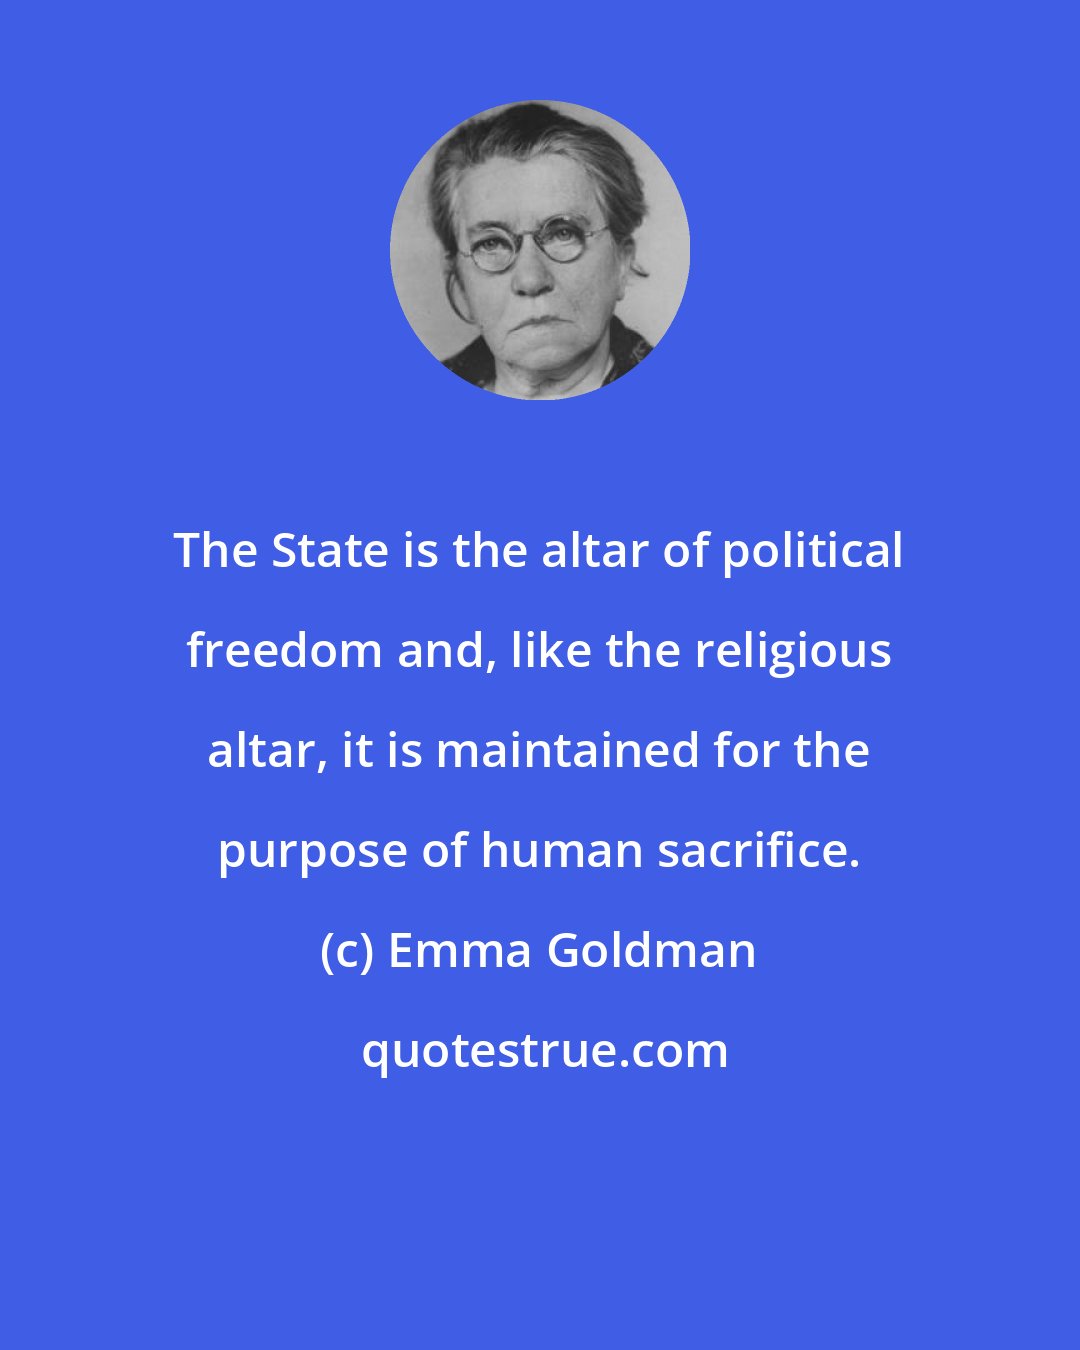 Emma Goldman: The State is the altar of political freedom and, like the religious altar, it is maintained for the purpose of human sacrifice.